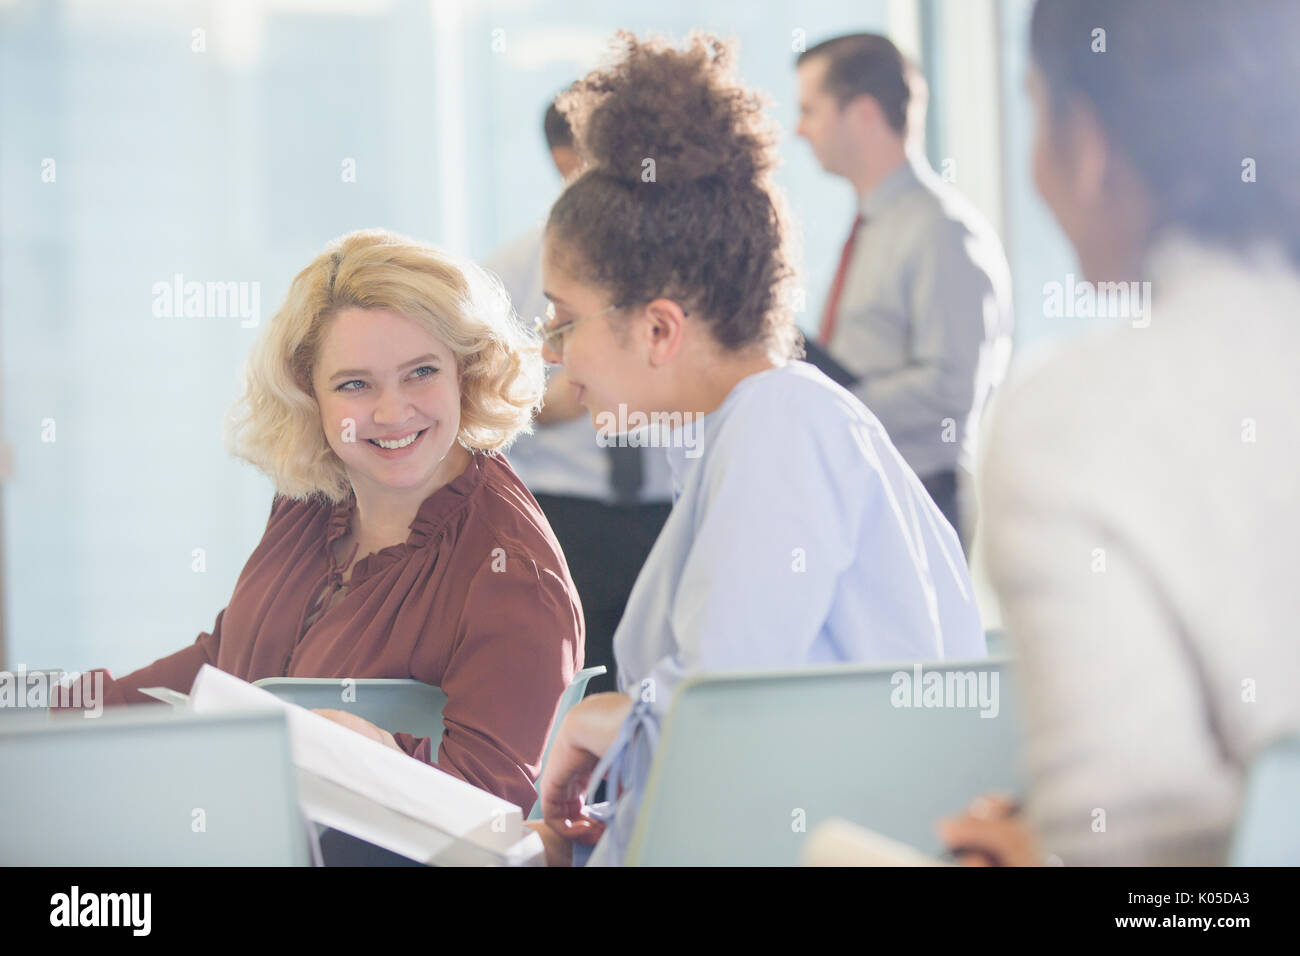 Businesswomen discussing paperwork in conference audience Stock Photo